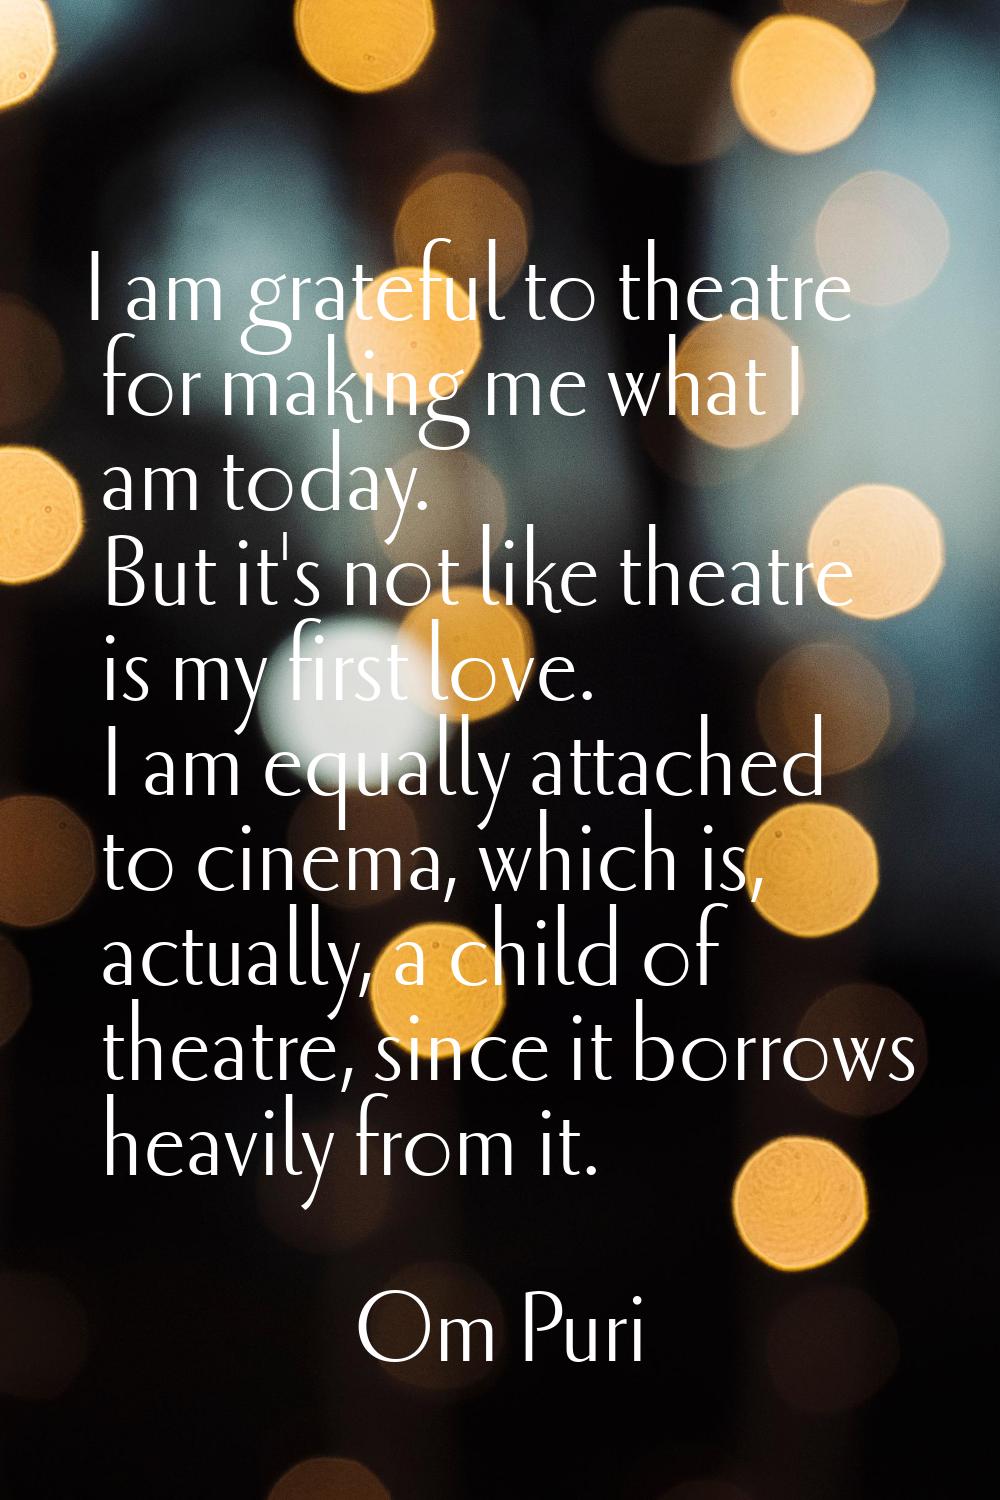 I am grateful to theatre for making me what I am today. But it's not like theatre is my first love.